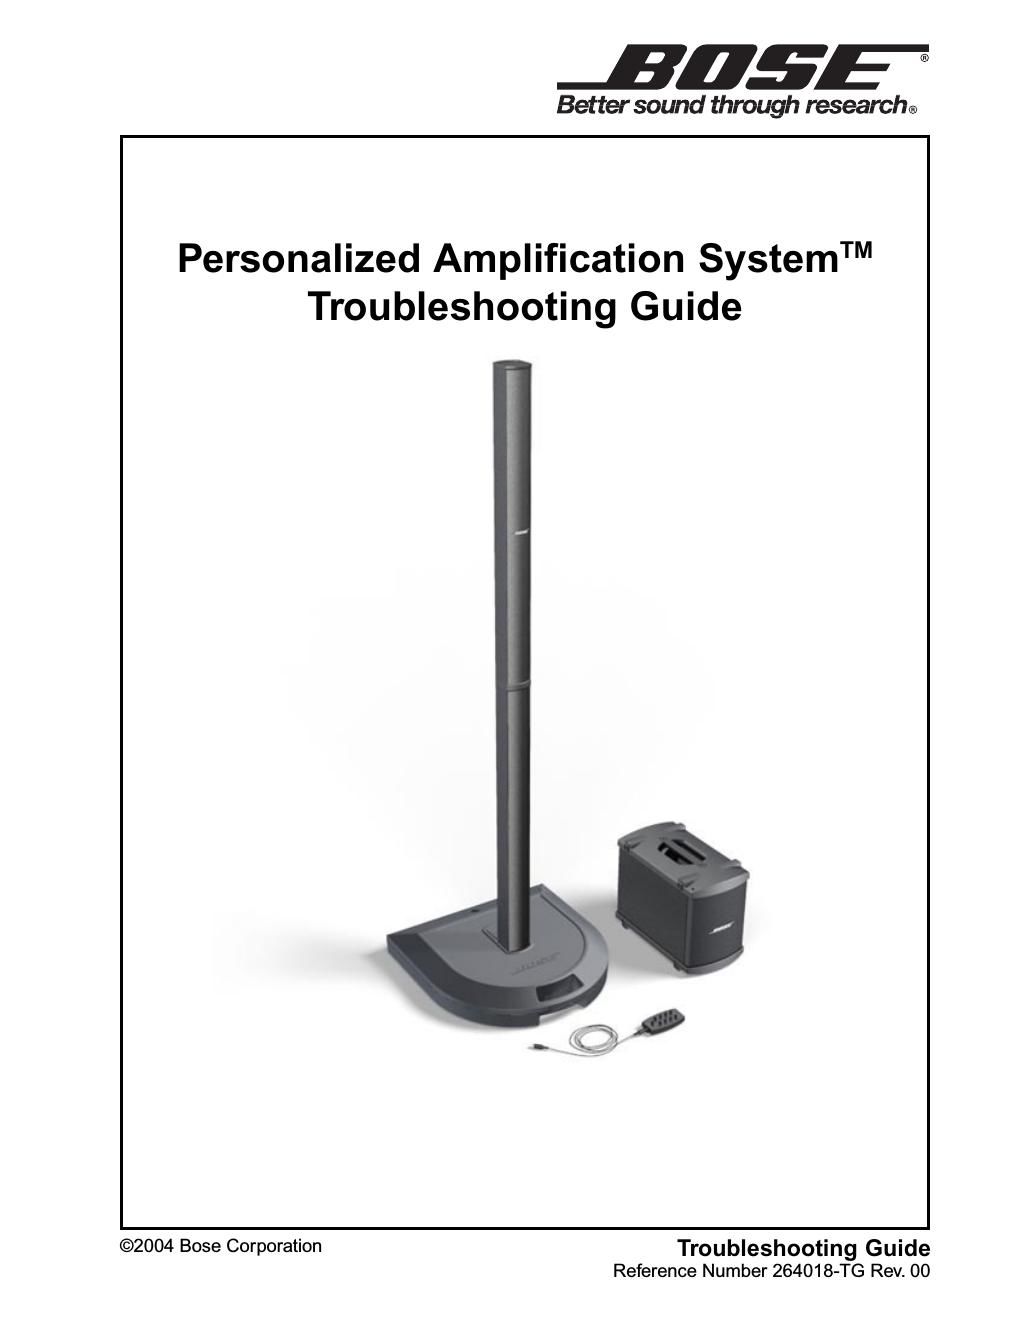 bose personalized amplification system troubleshooting guide